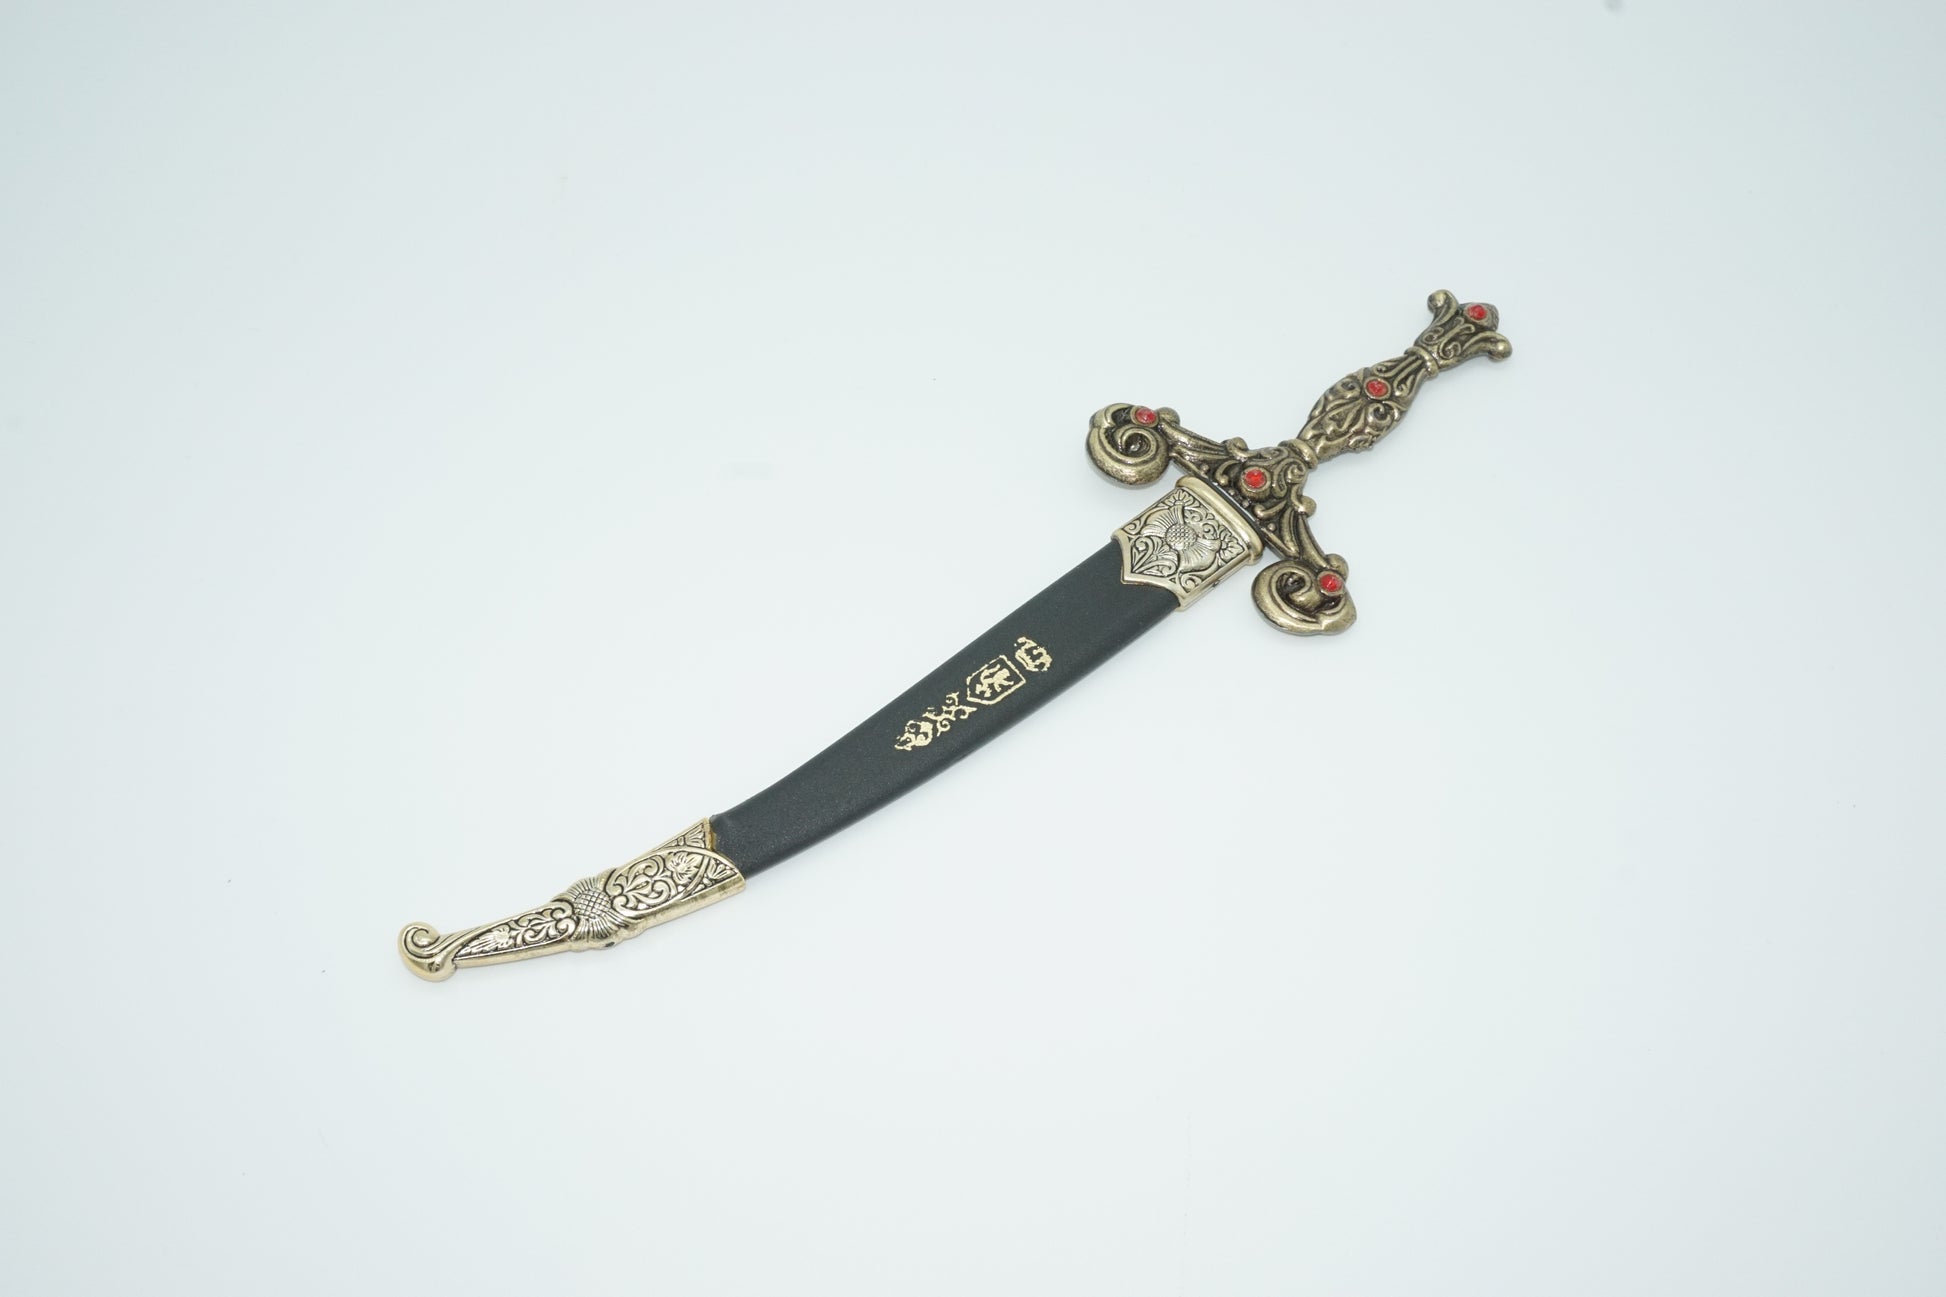 Spanish dagger in black sheath with silver accents on top, middle and bottom of the sheath. 